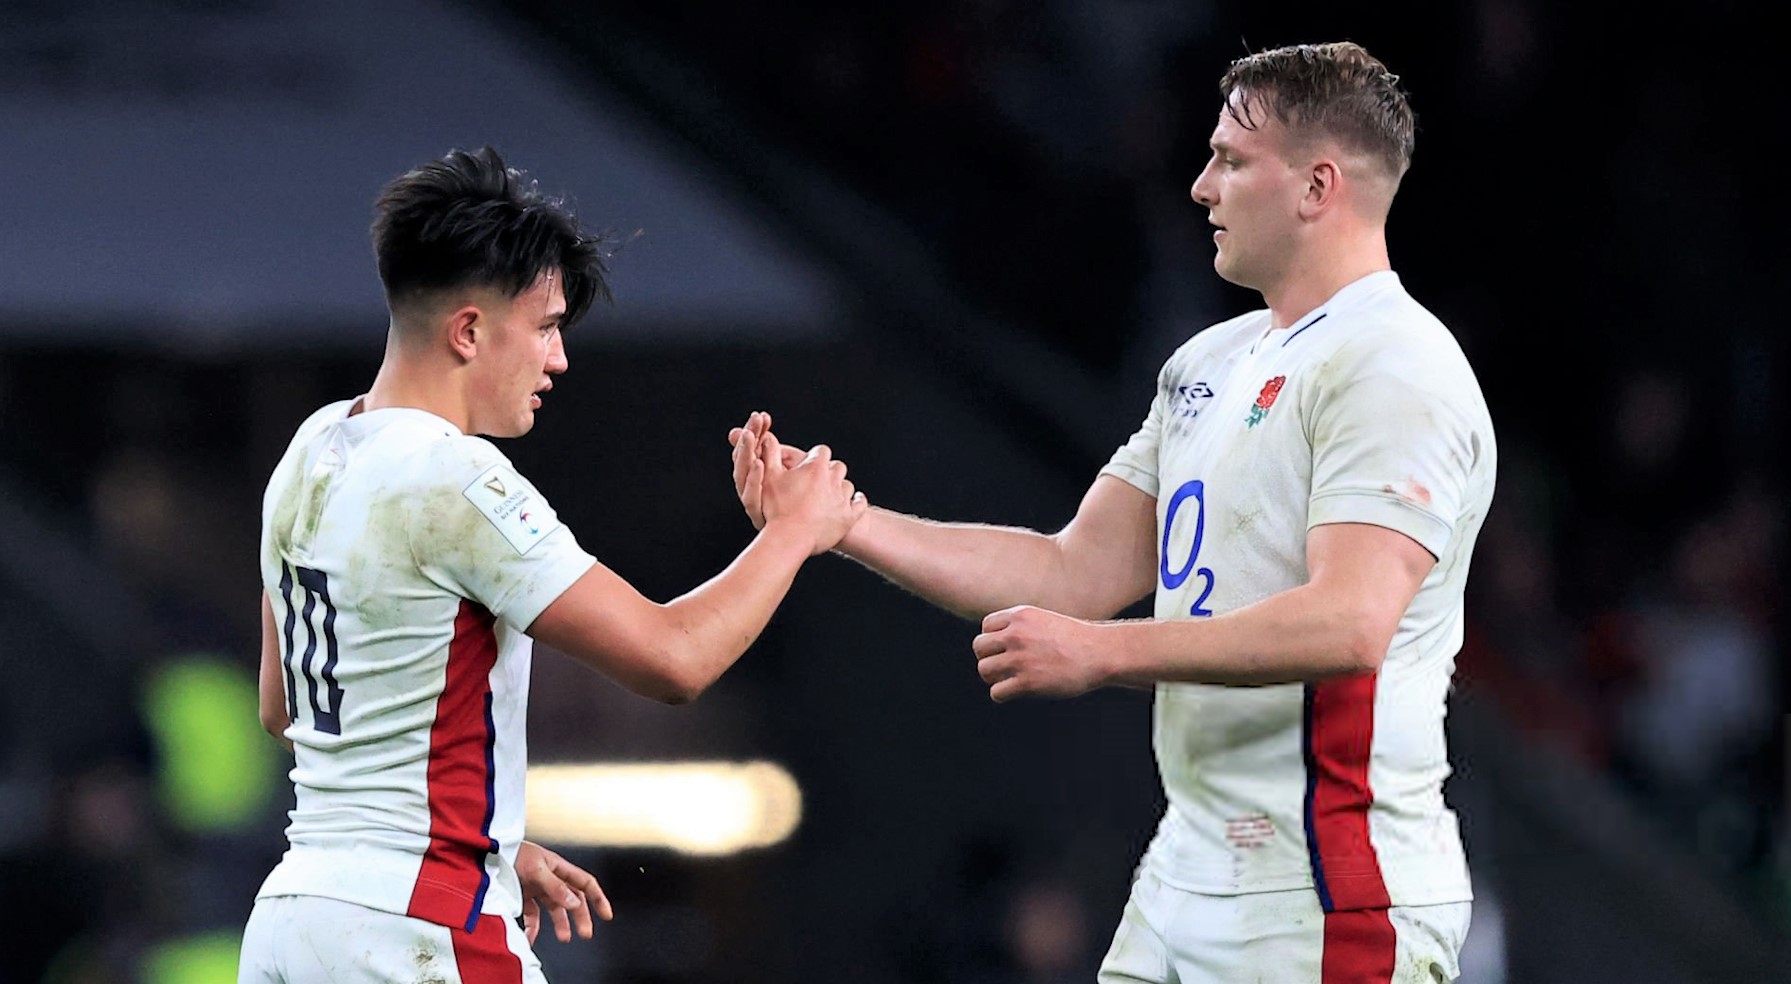 LONDON, ENGLAND - FEBRUARY 26: Marcus Smith of England shakes hands with Alex Dombrandt of England after the final whistle during the Guinness Six Nations Rugby match between England and Wales at Twickenham Stadium on February 26, 2022 in London, England. (Photo by David Rogers/Getty Images)